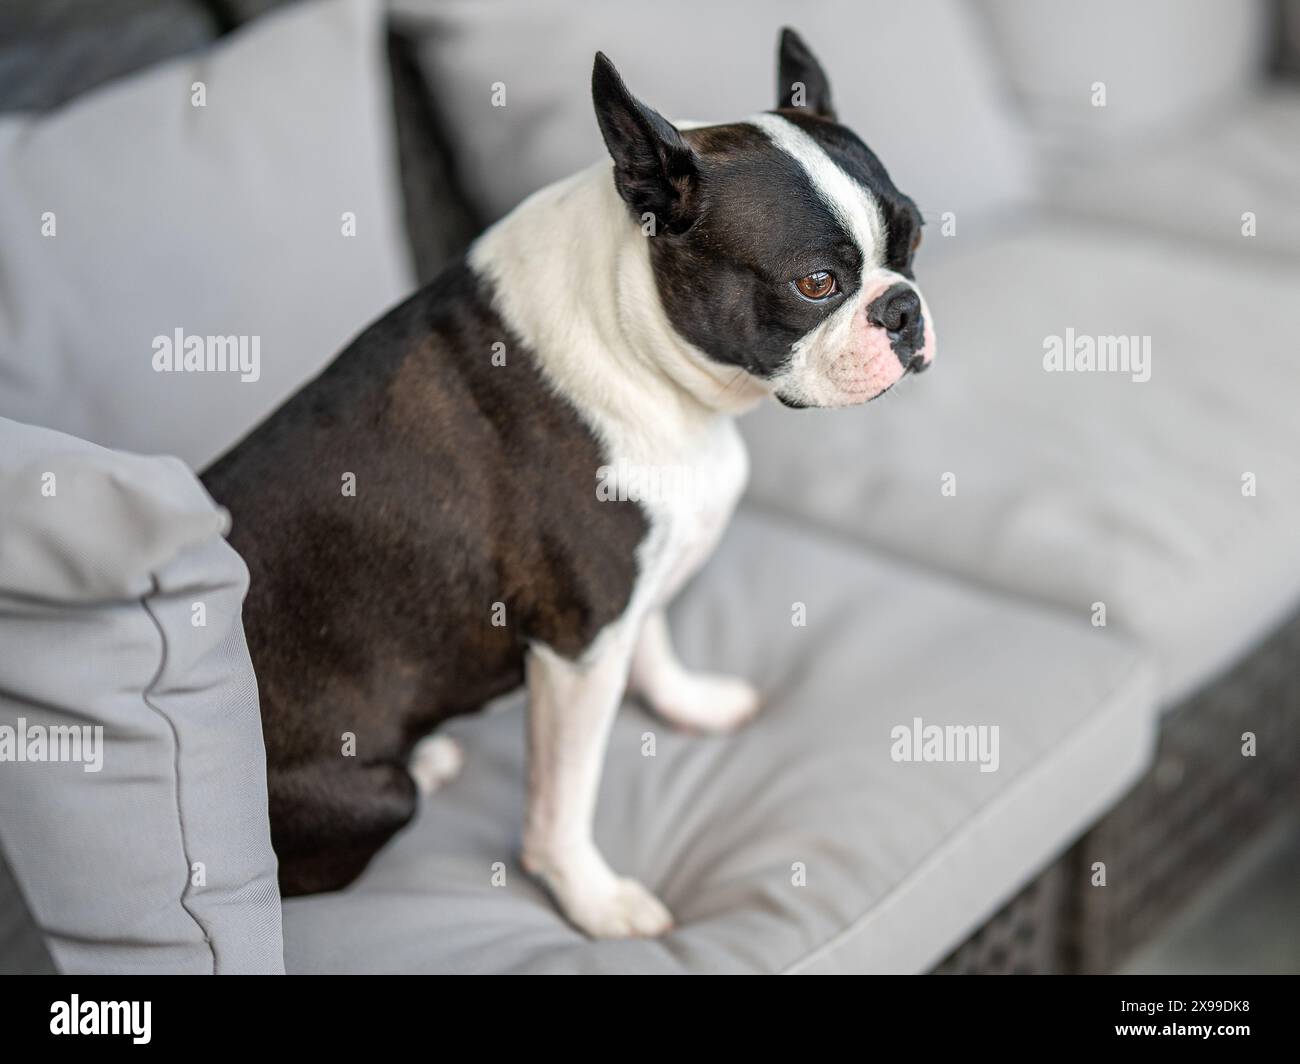 Three-year-old Boston terrier seated in couch Stock Photo